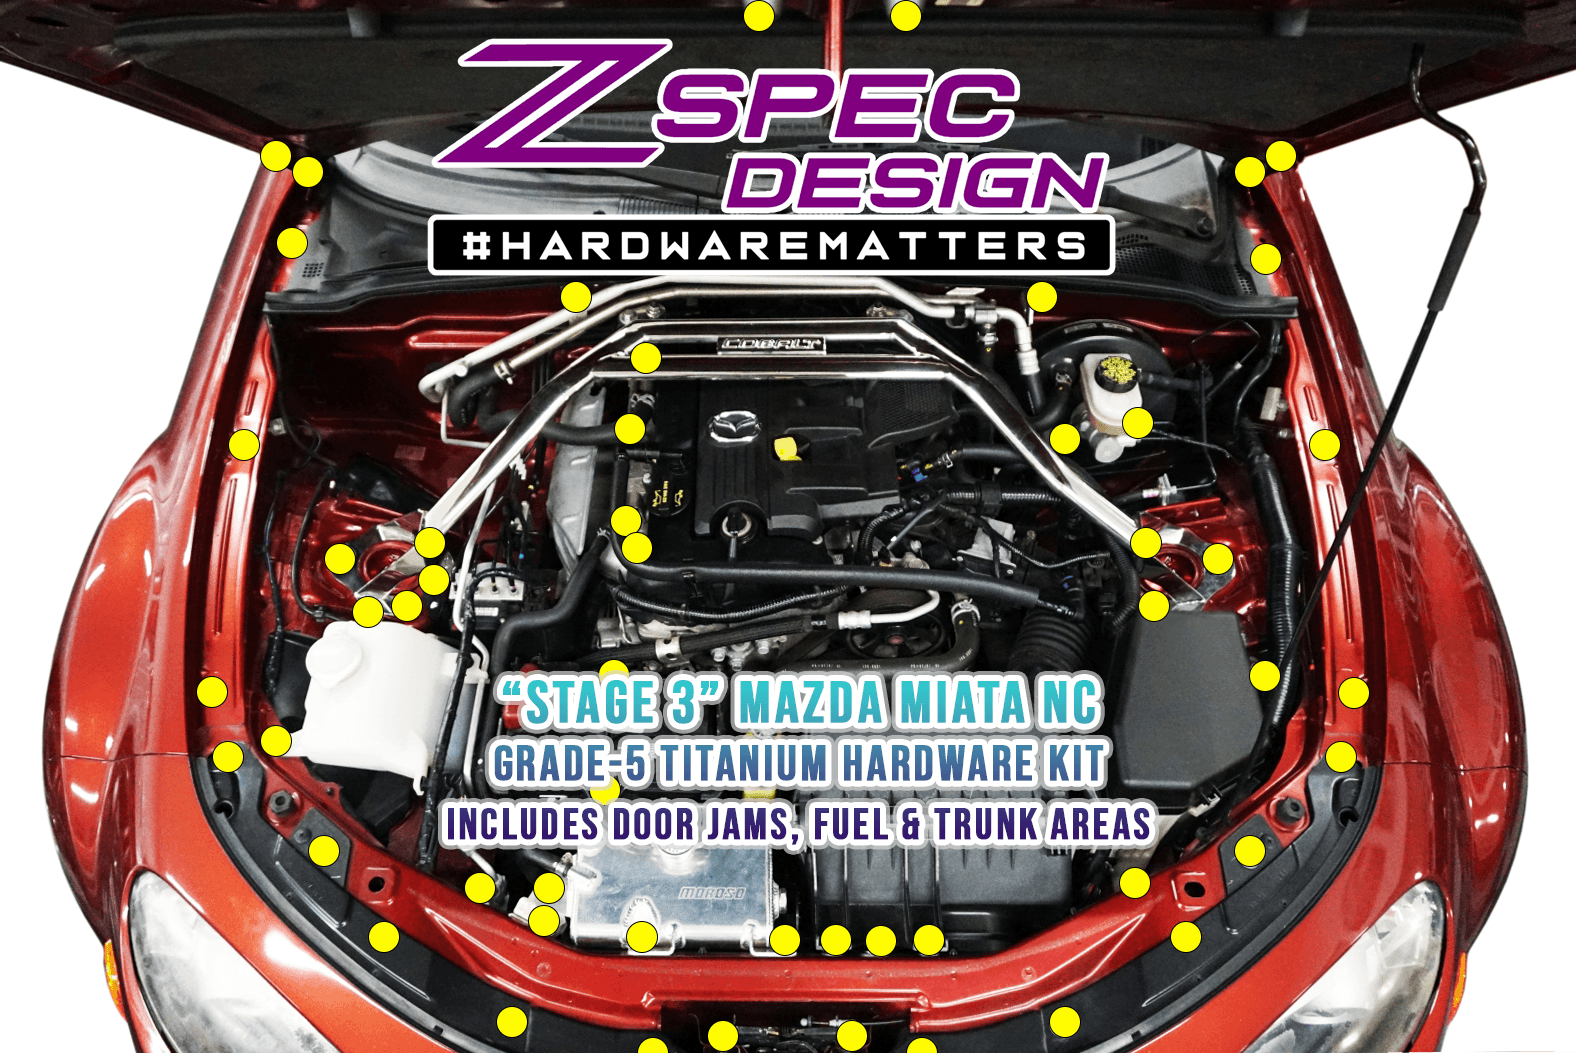 ZSPEC "Stage 3" Dress Up Bolts® Fastener Kit for Mazda Miata NC, Titanium Hardware  Grade-5 GR5 Hardware Fasteners & Finish Washers, Bagged & Labeled Sport Compact Car Auto by Area ZSPEC Design